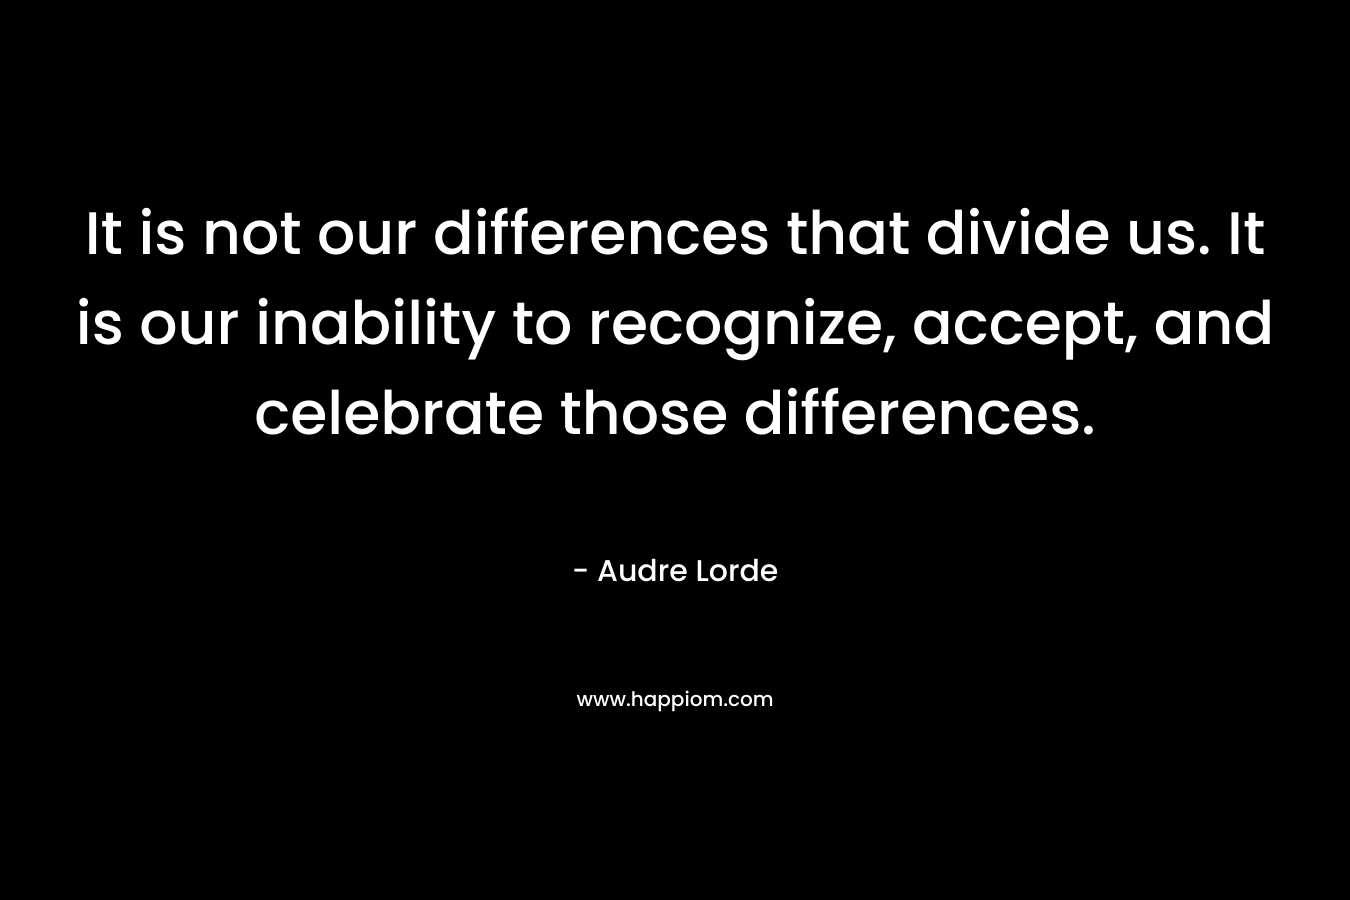 It is not our differences that divide us. It is our inability to recognize, accept, and celebrate those differences. – Audre Lorde